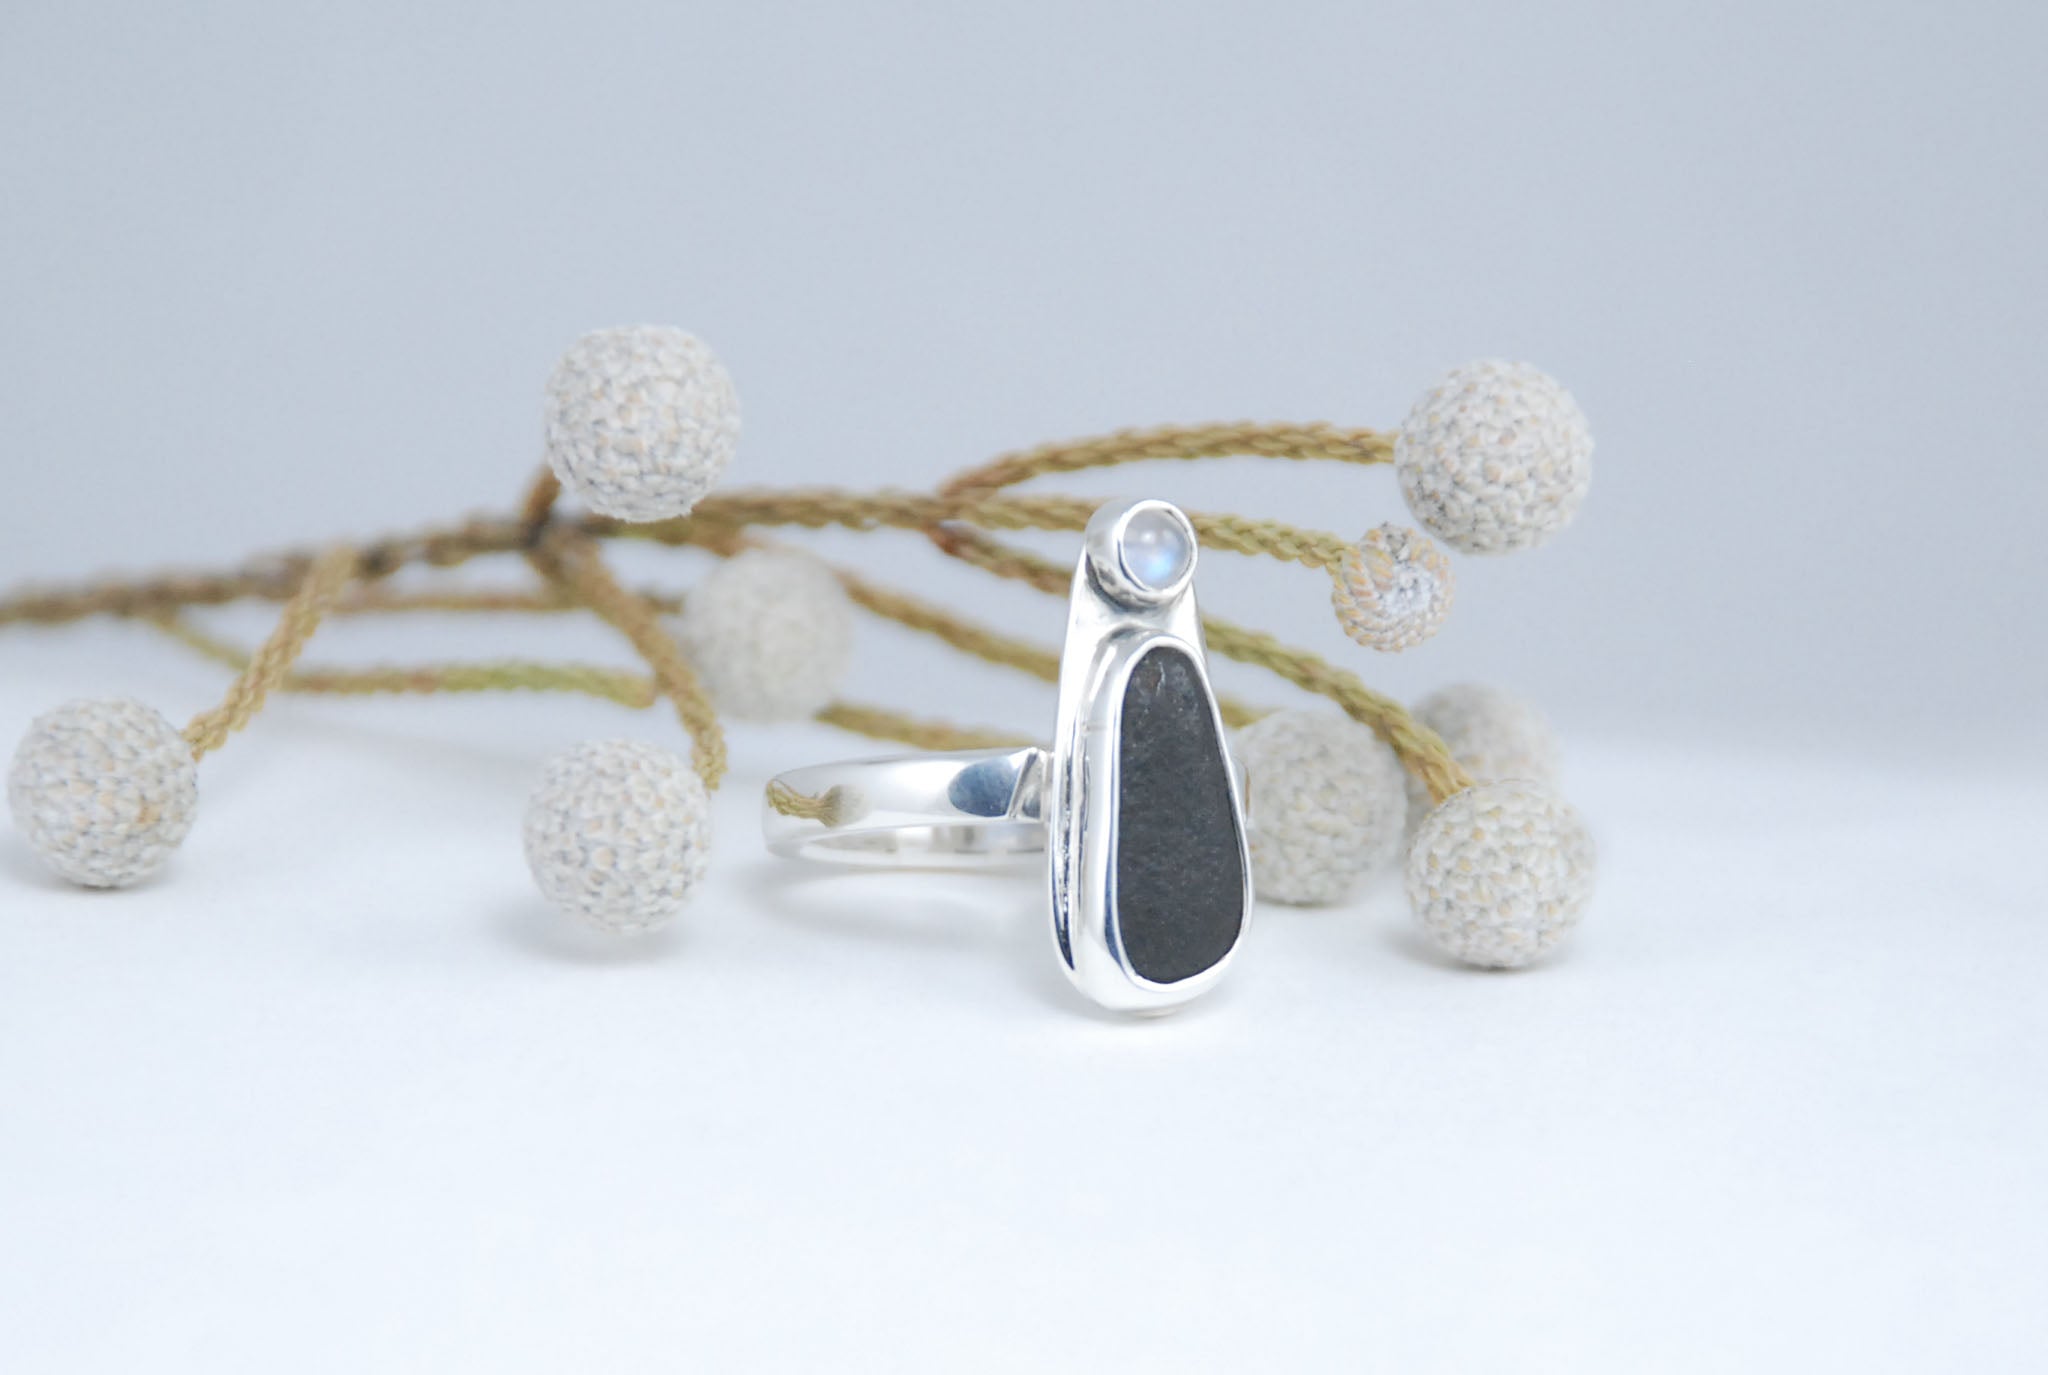 Black stone and moonstone Sterling silver ring.